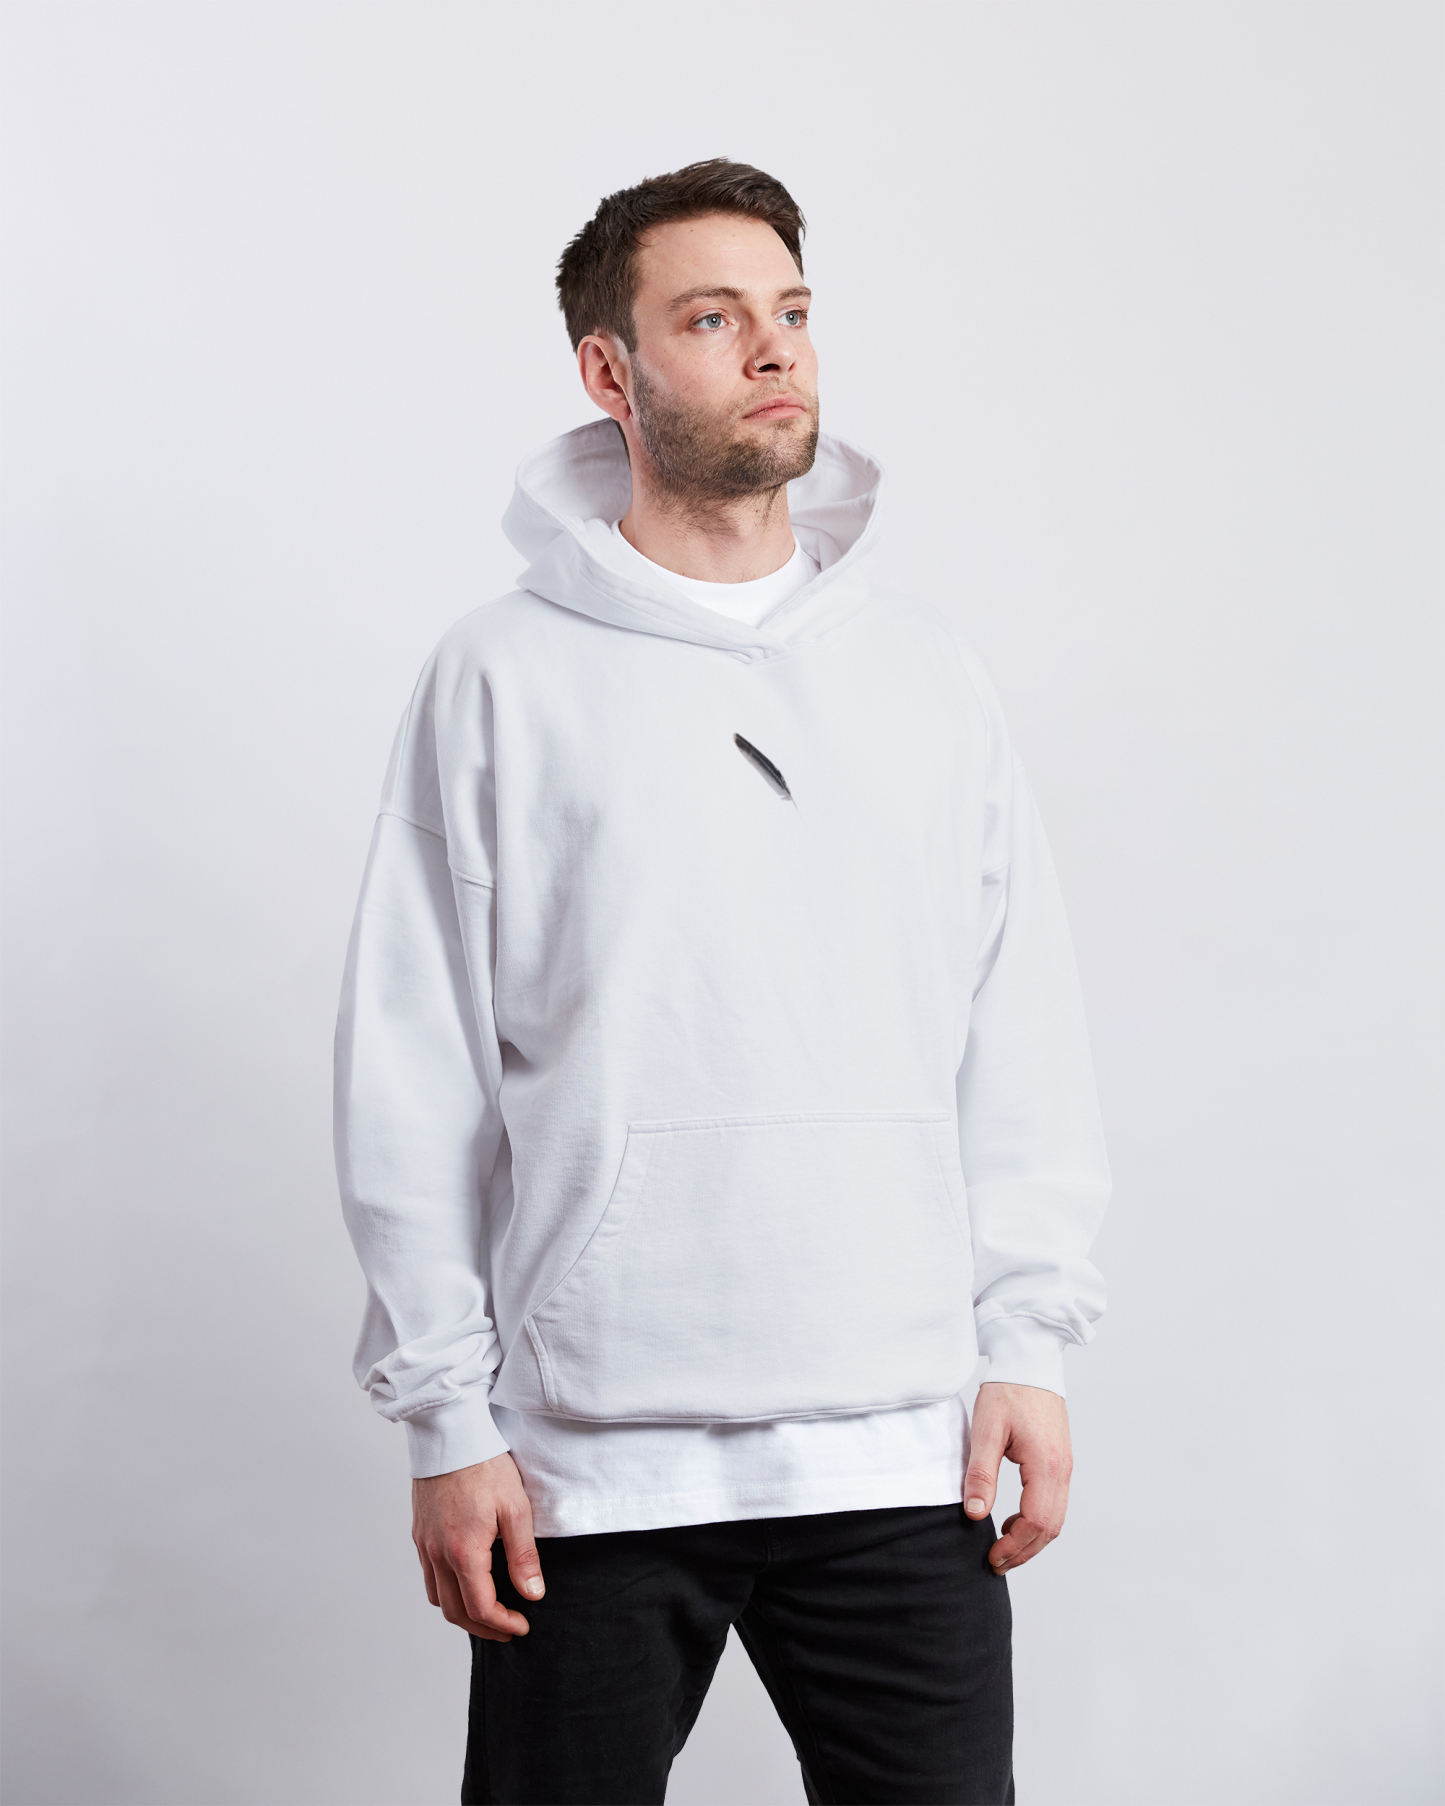 Death Note Akuma Collection | White Hoodie